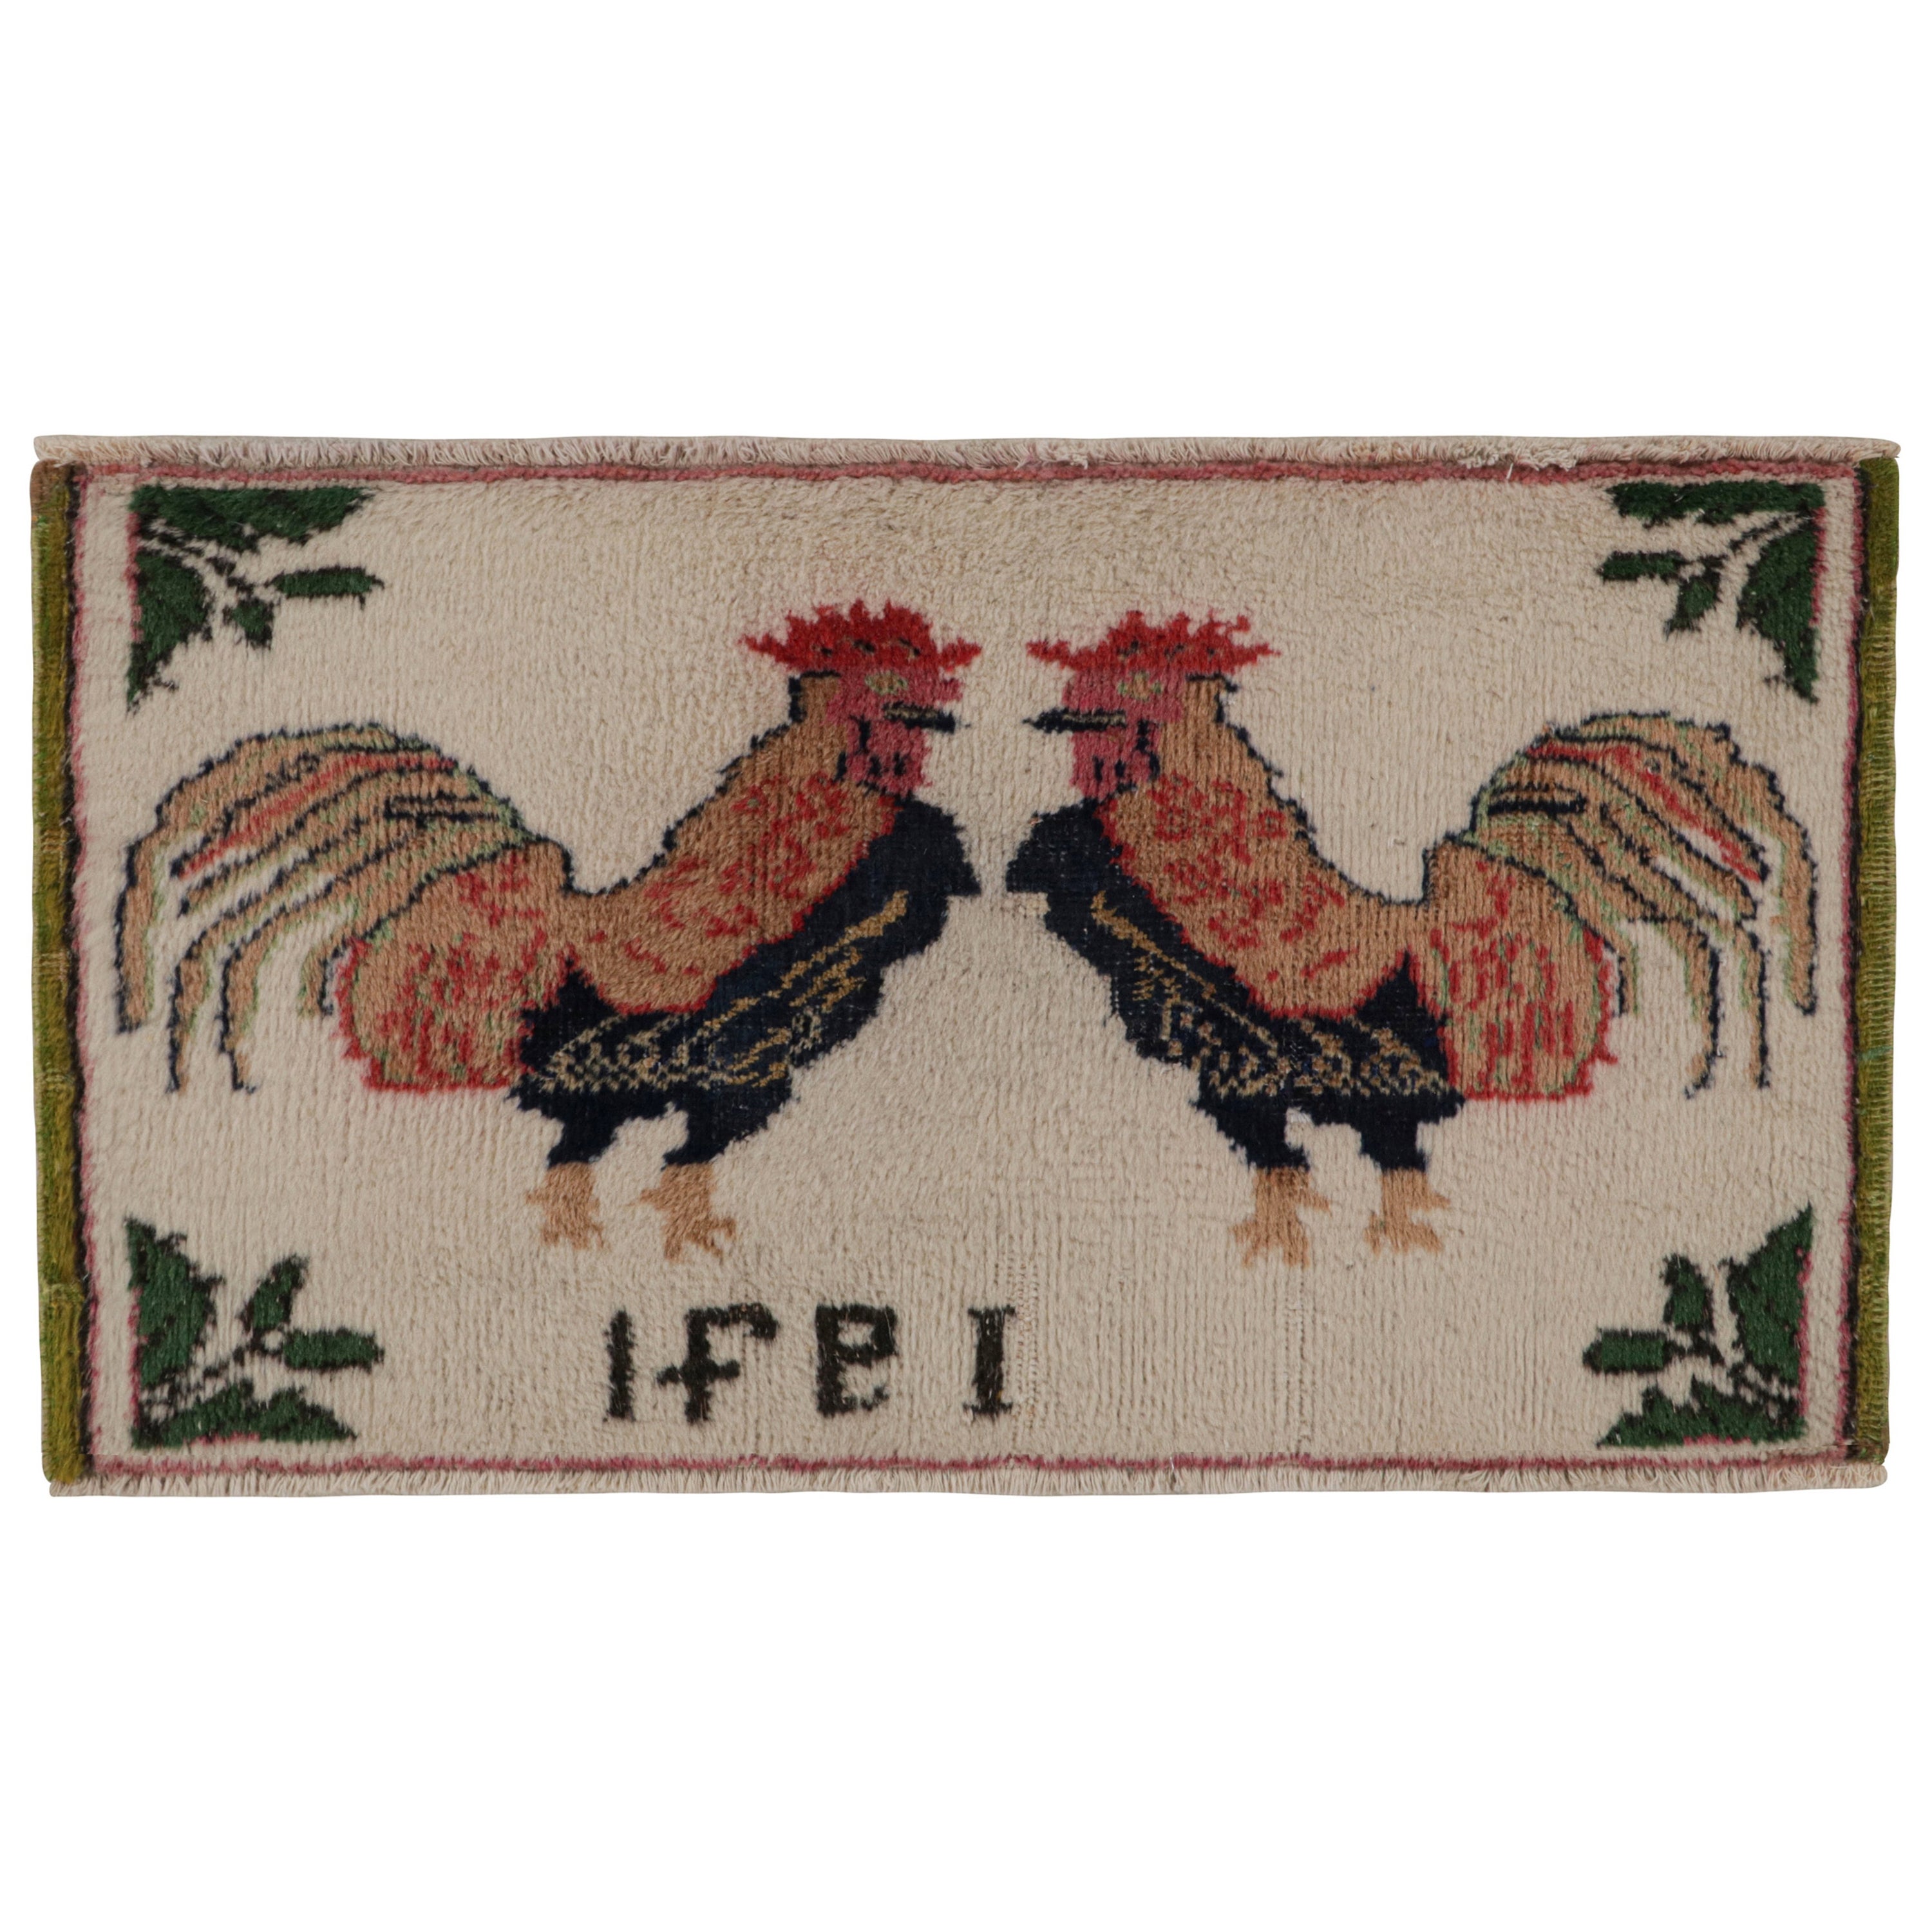 Vintage Signature Pictorial Rug with Rooster Drawings, from Rug & Kilim For Sale